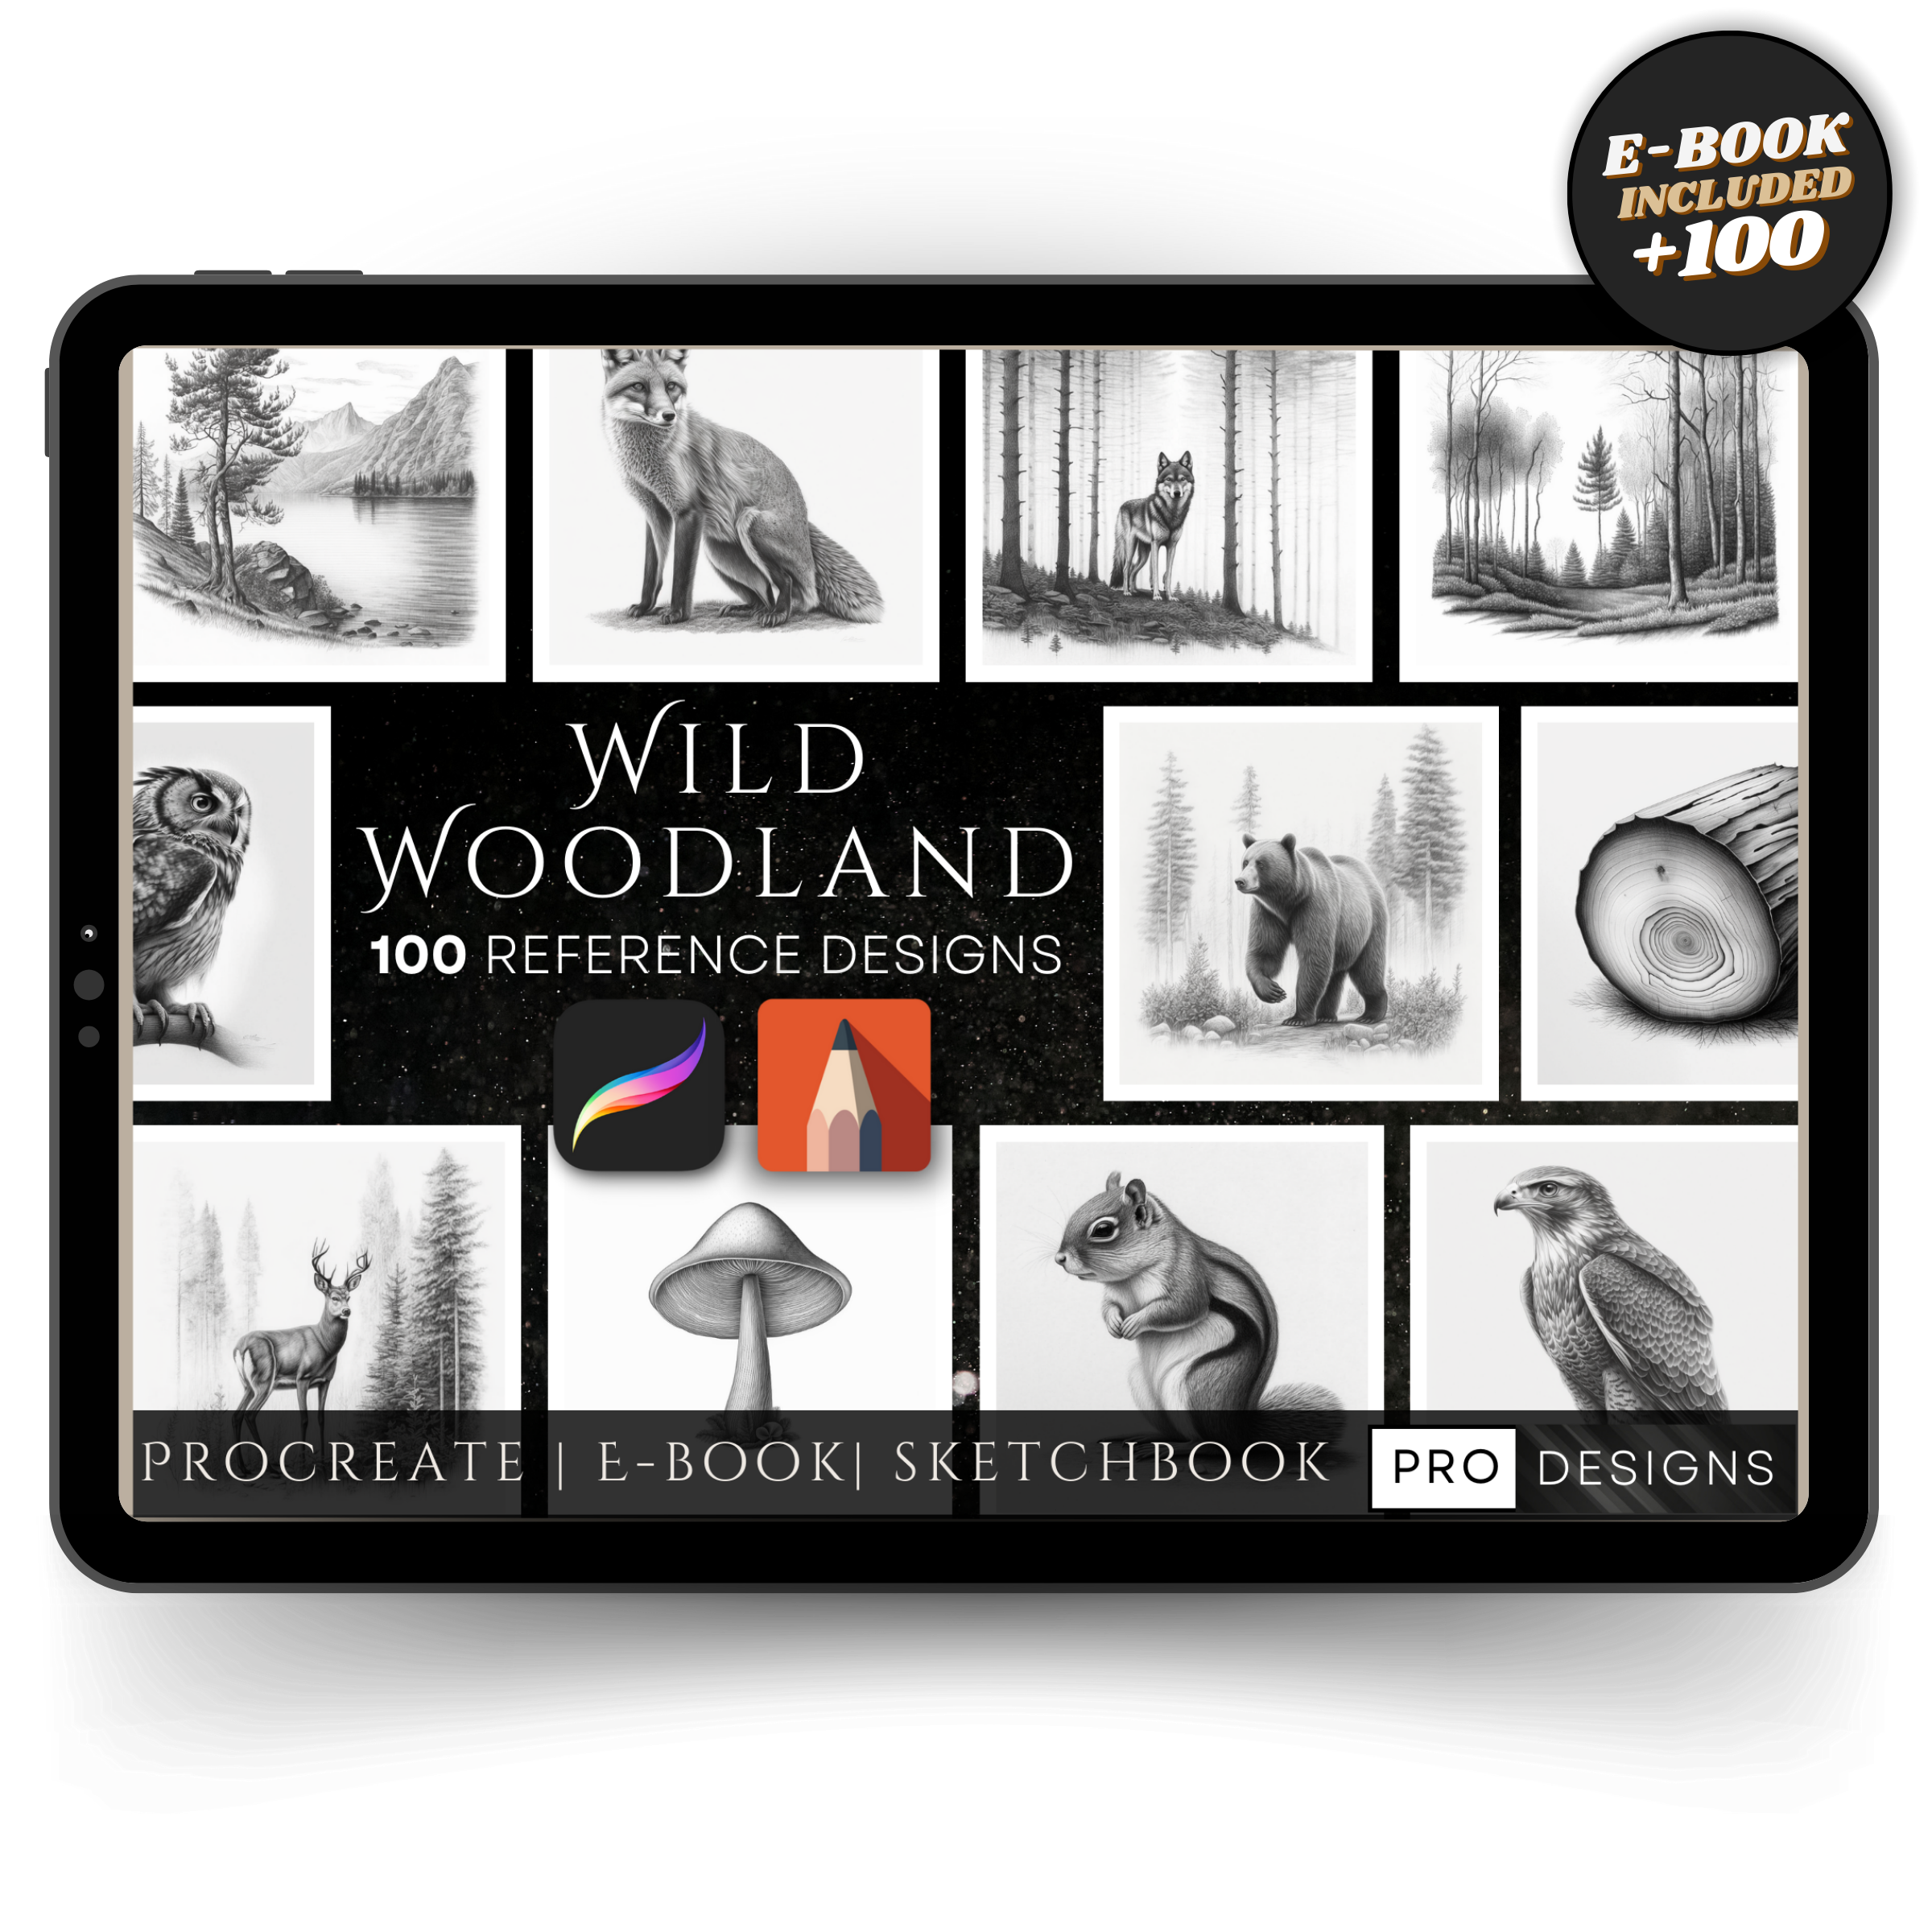 "Whispering Woods" - The Wild Woodland Collection